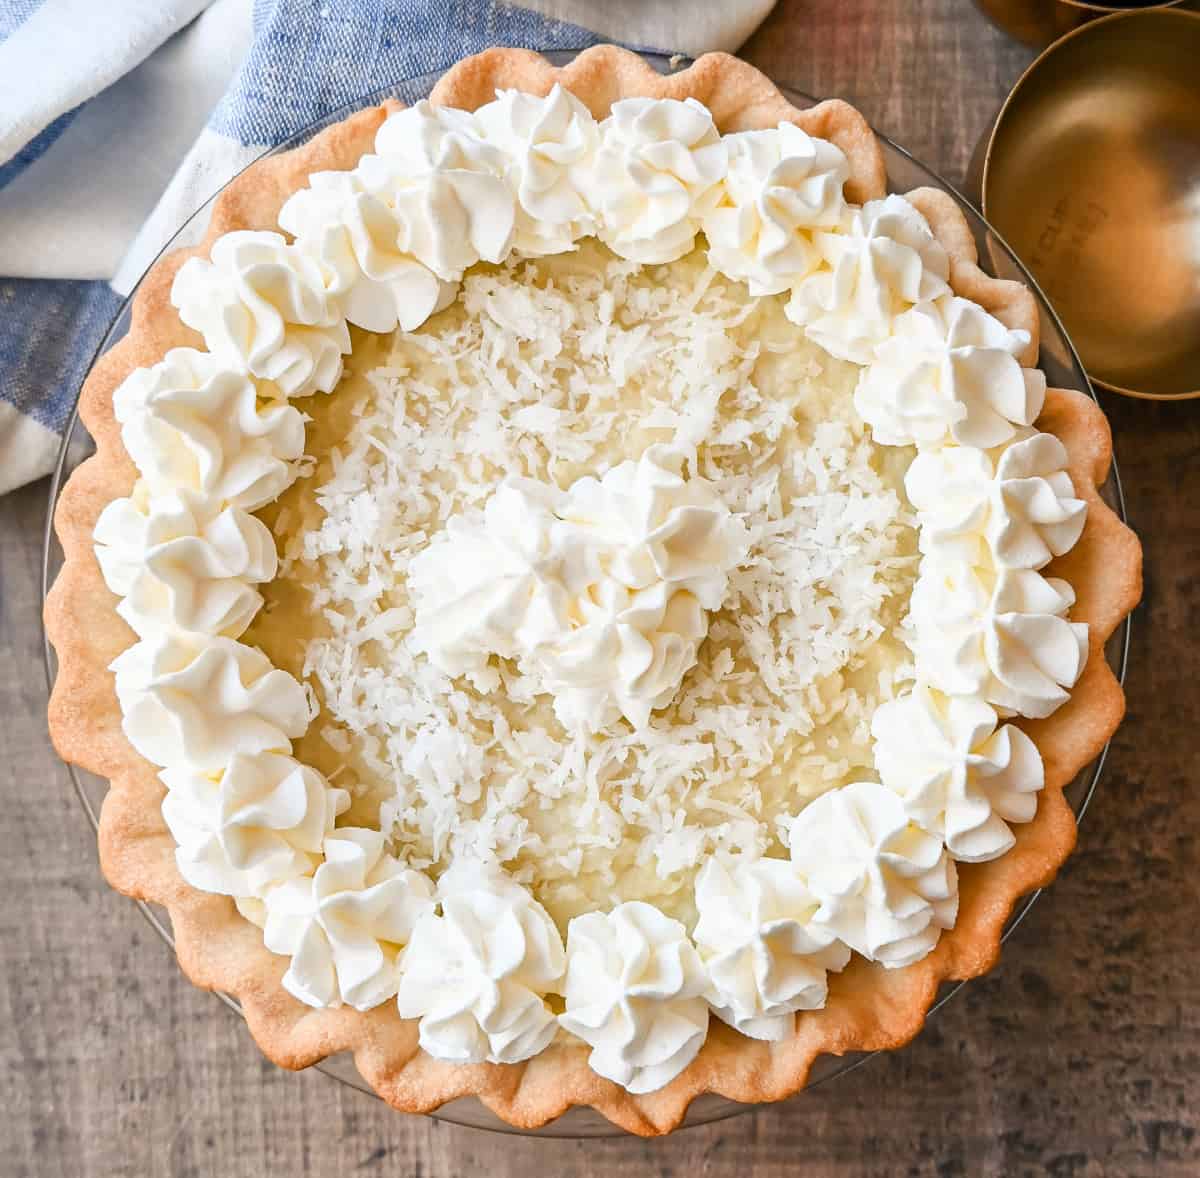 This Coconut Cream Pie is made with a homemade coconut custard filling in a buttery pie crust topped with fresh whipped cream and toasted coconut. This is the famous Dahlia Bakery's secret coconut cream pie recipe.